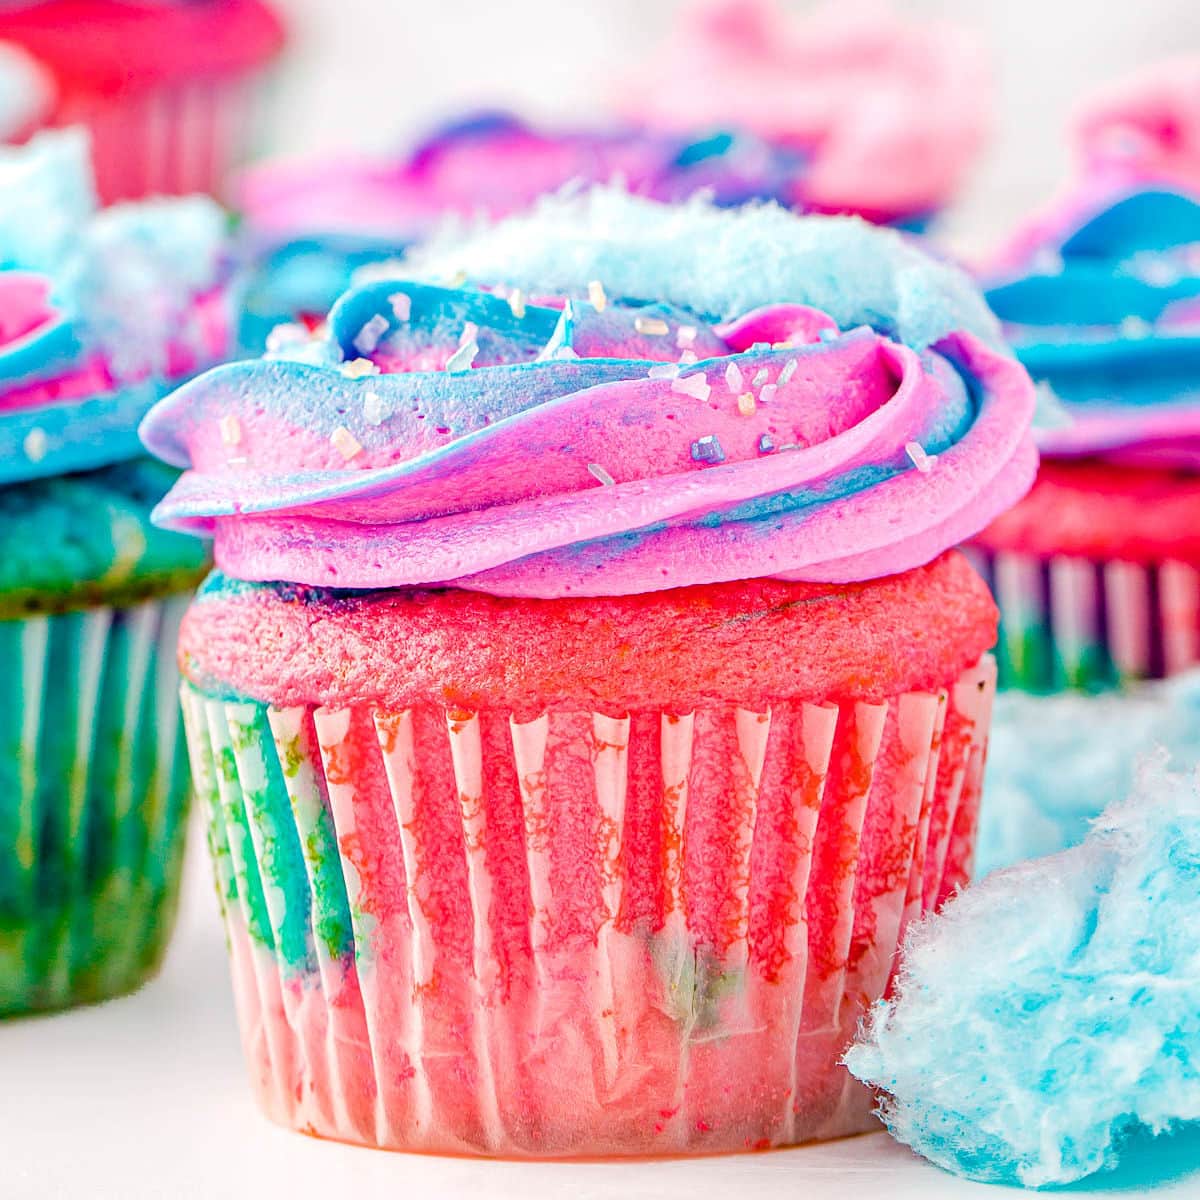 https://www.momontimeout.com/wp-content/uploads/2022/02/best-cotton-candy-cupcakes-recipe-square.jpeg